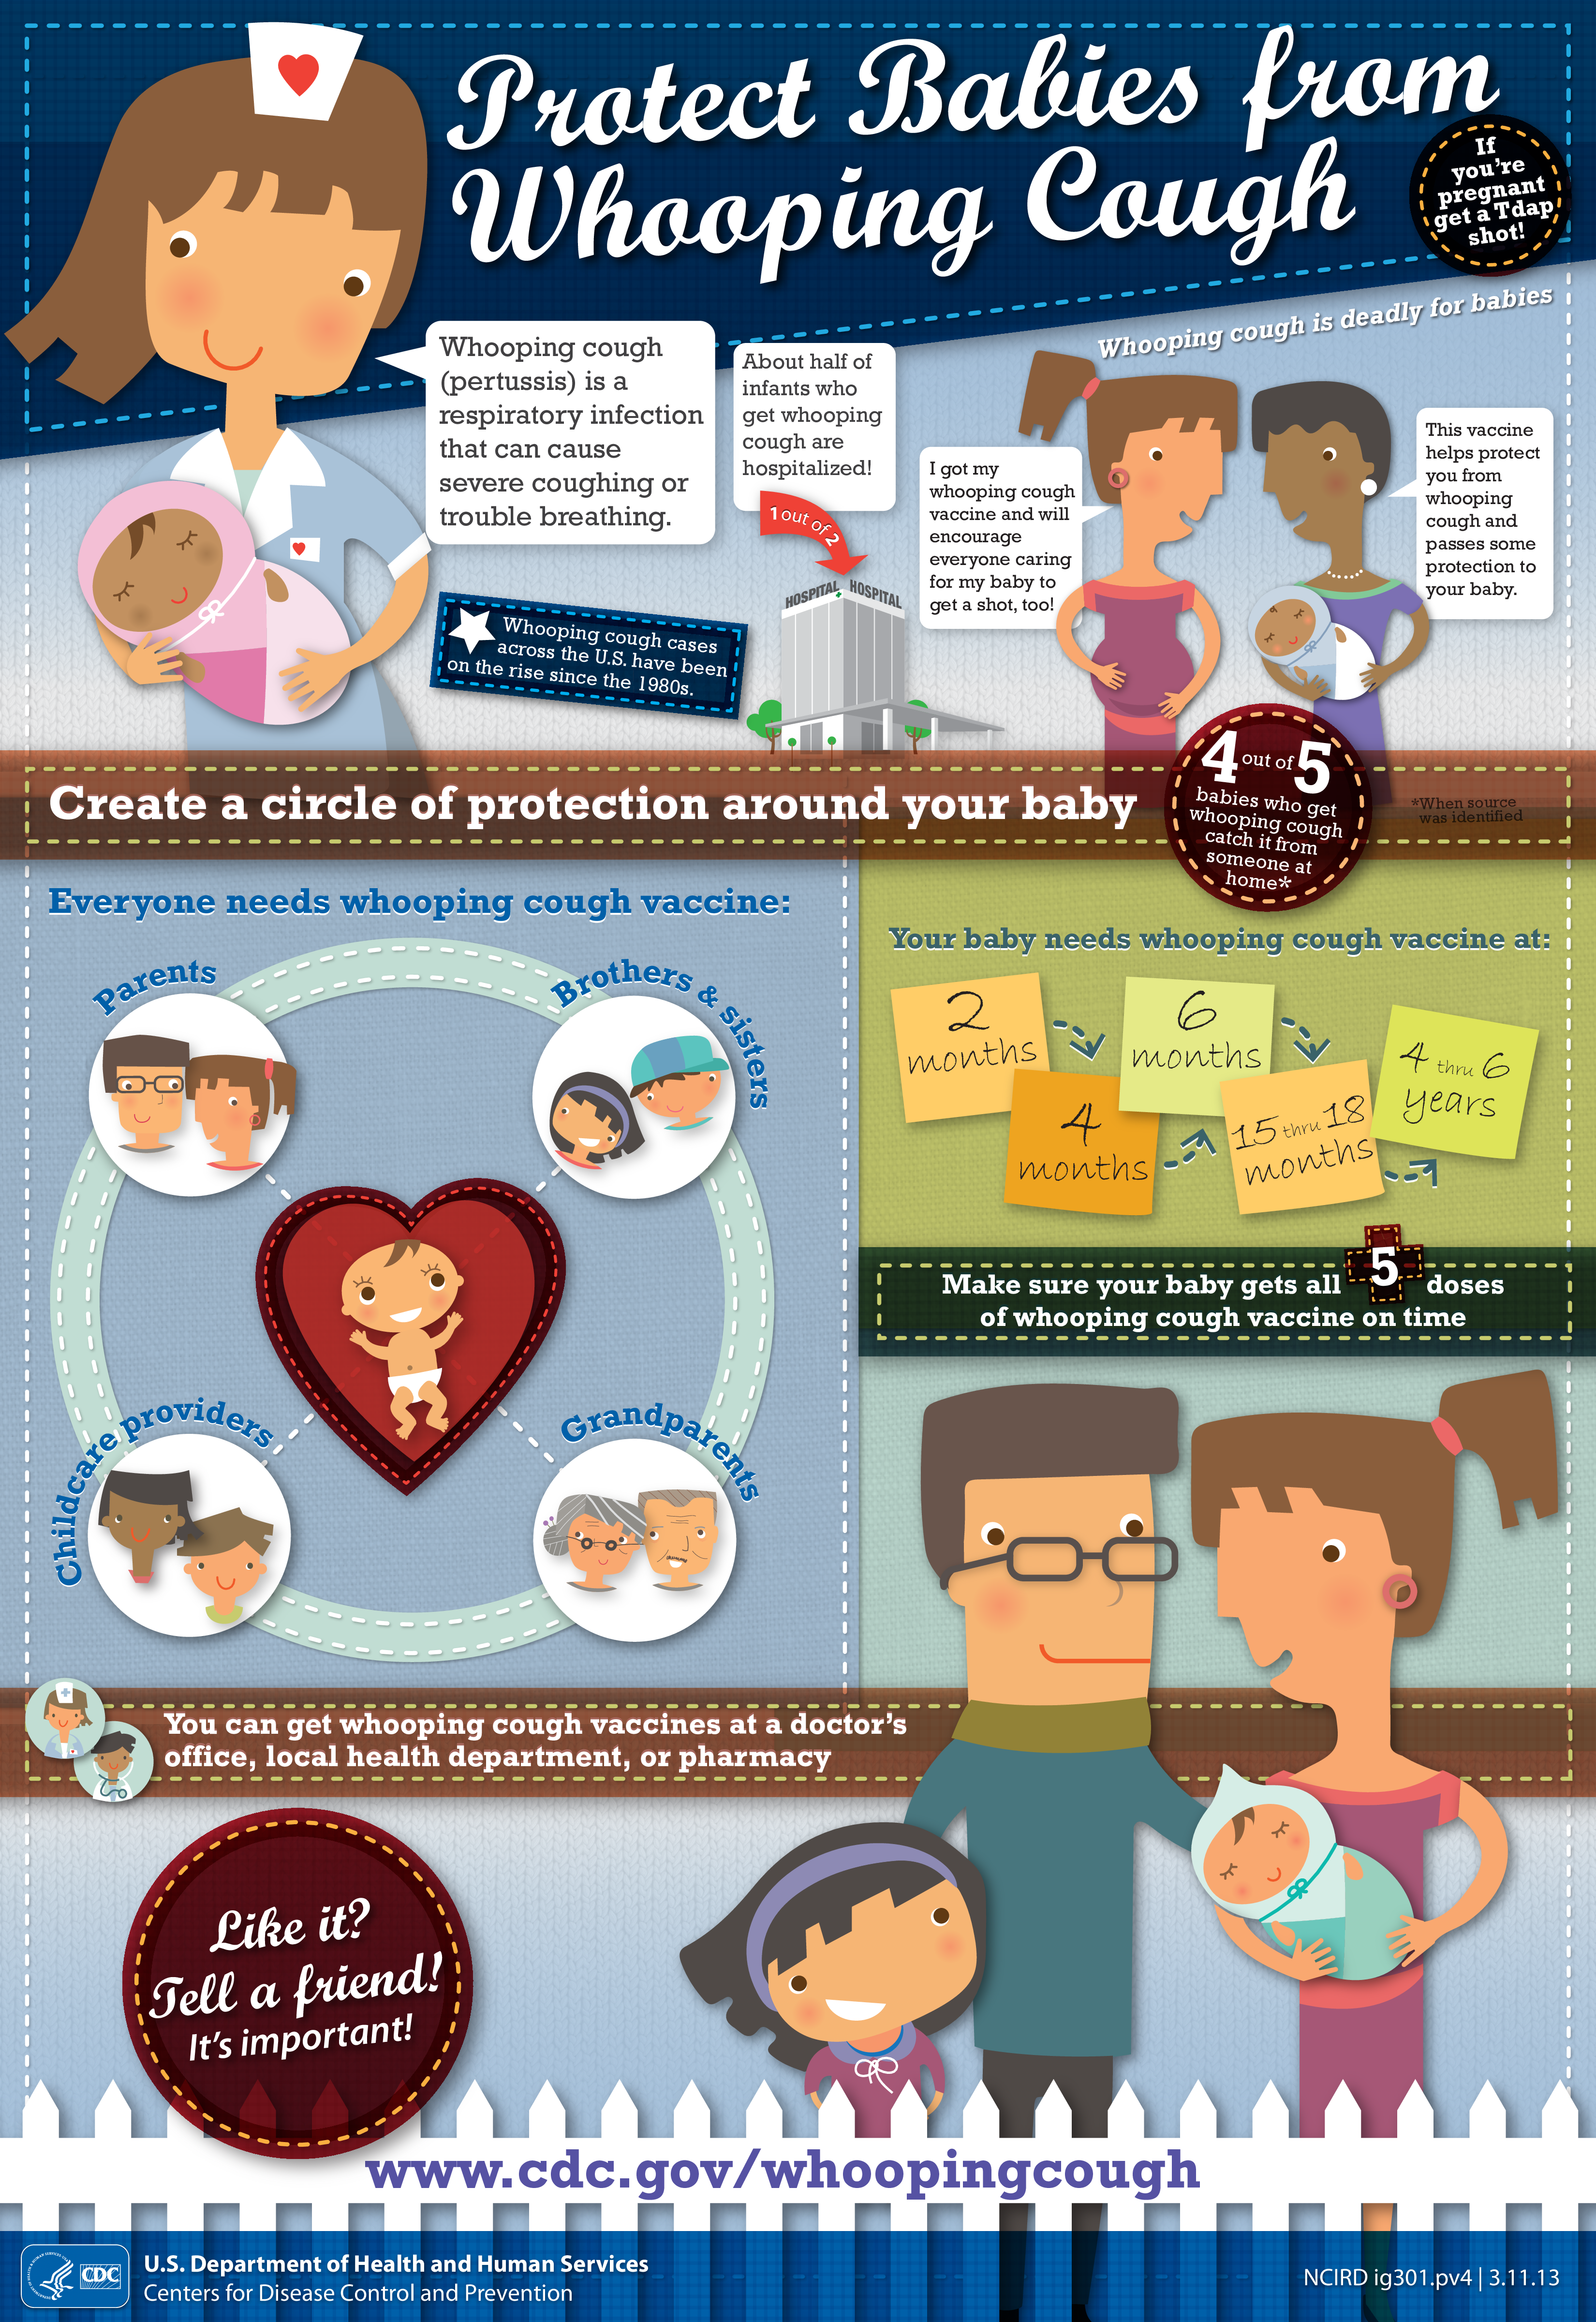 Colorful flyer with graphics of smiling healthcare providers, babies, and families of multiple races to promote whooping cough vaccination for babies, parents, family members, and caregivers. A website link and CDC logo are at the bottom of the flyer.